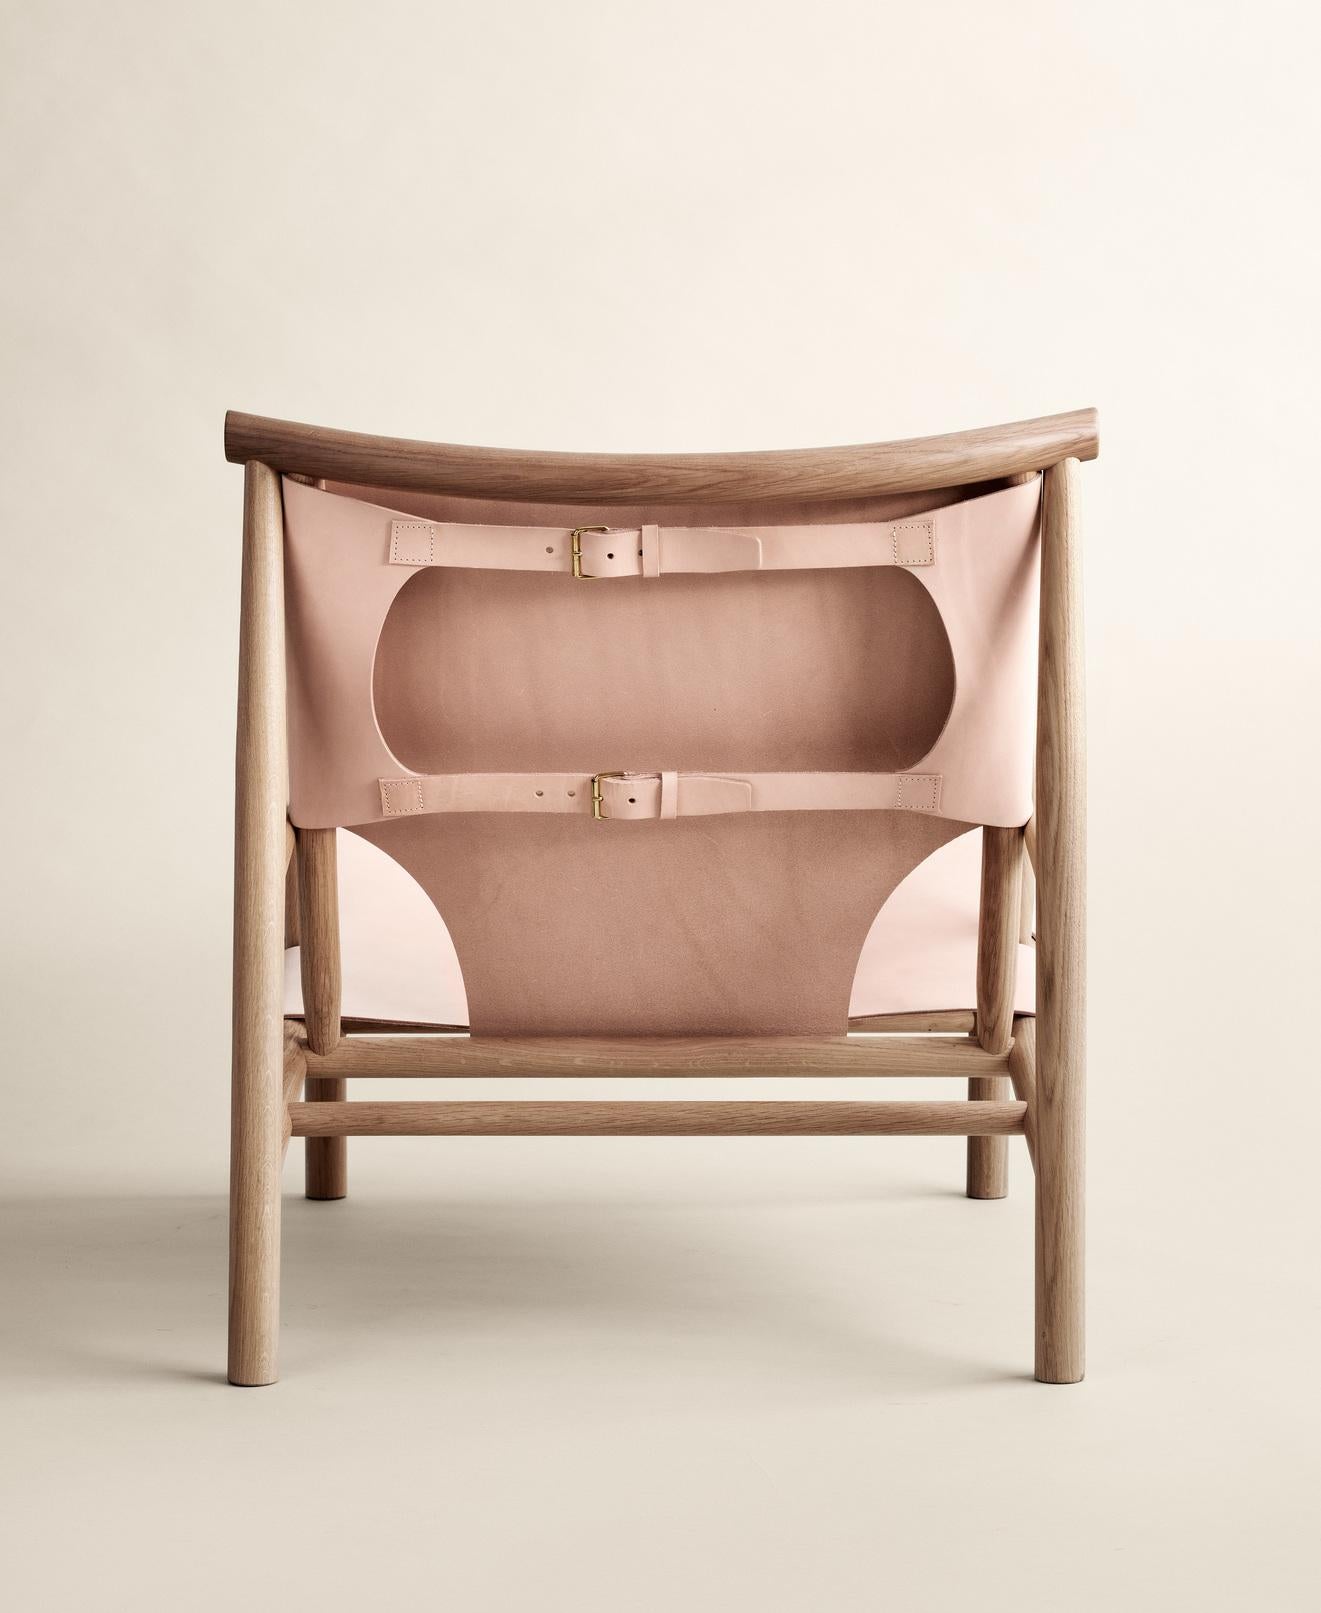 Danish Contemporary Chair 'Samurai' by Norr11, Natural Oak & Nature Leather For Sale